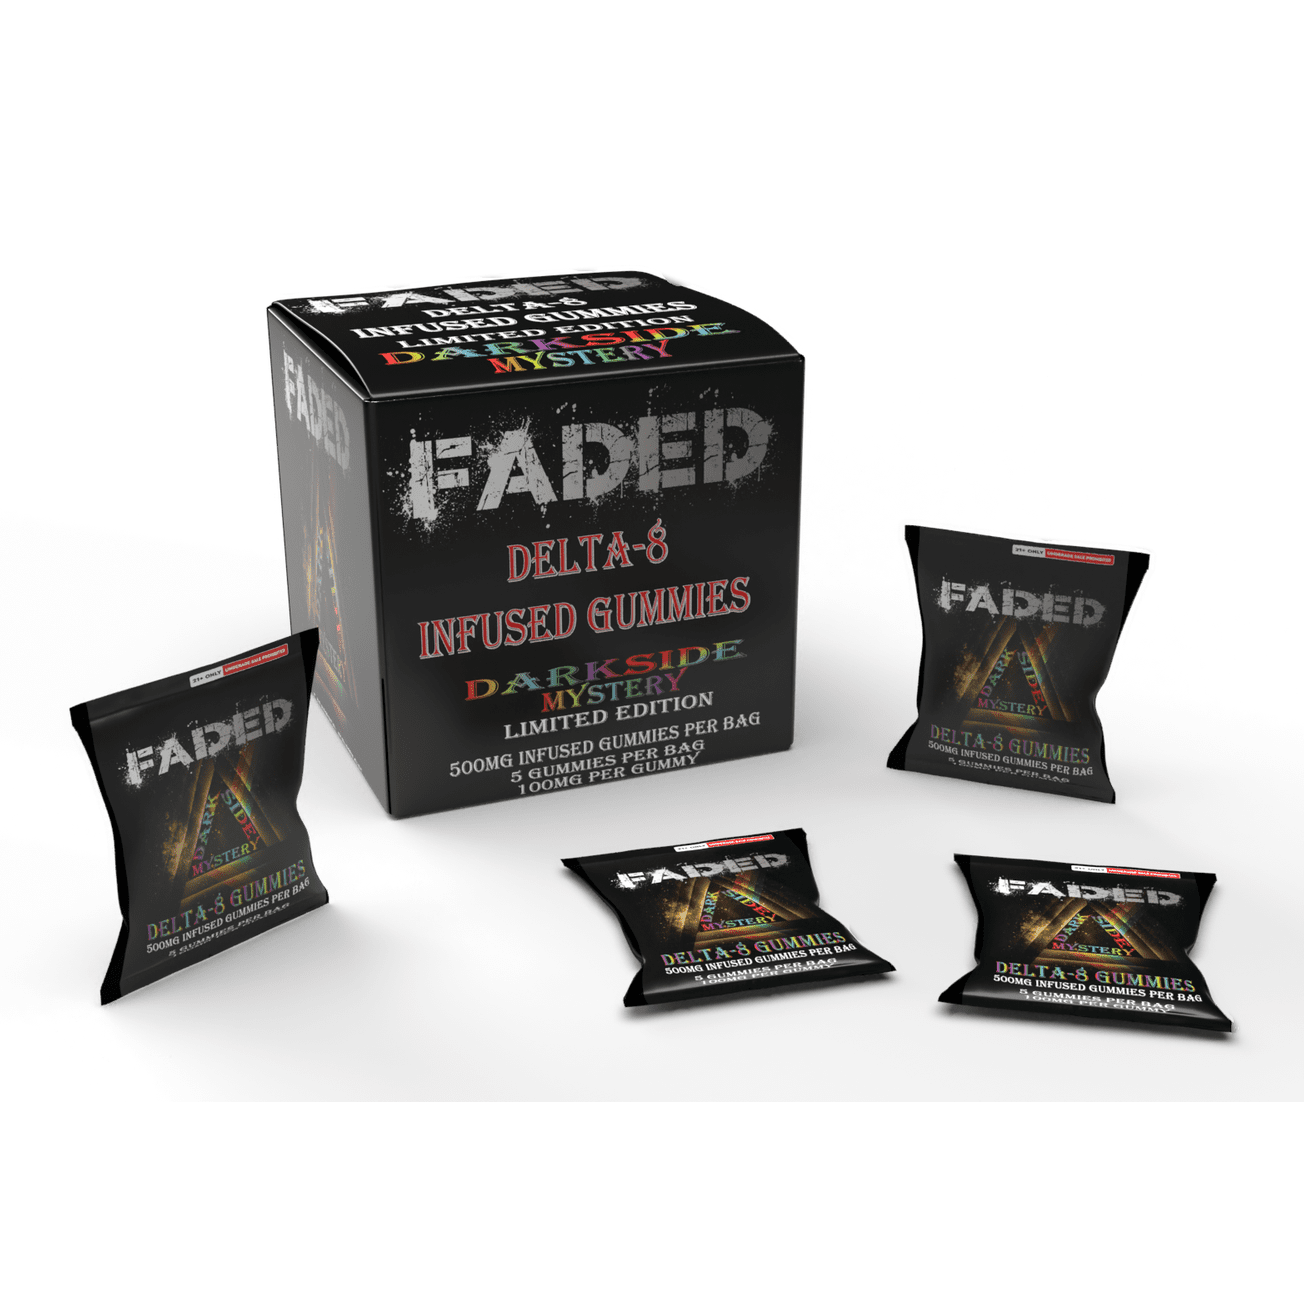 FADED DELTA - 8 DARKSIDE MYSTERY 5CT GUMMIES BAG 500MG LIMITED EDITION